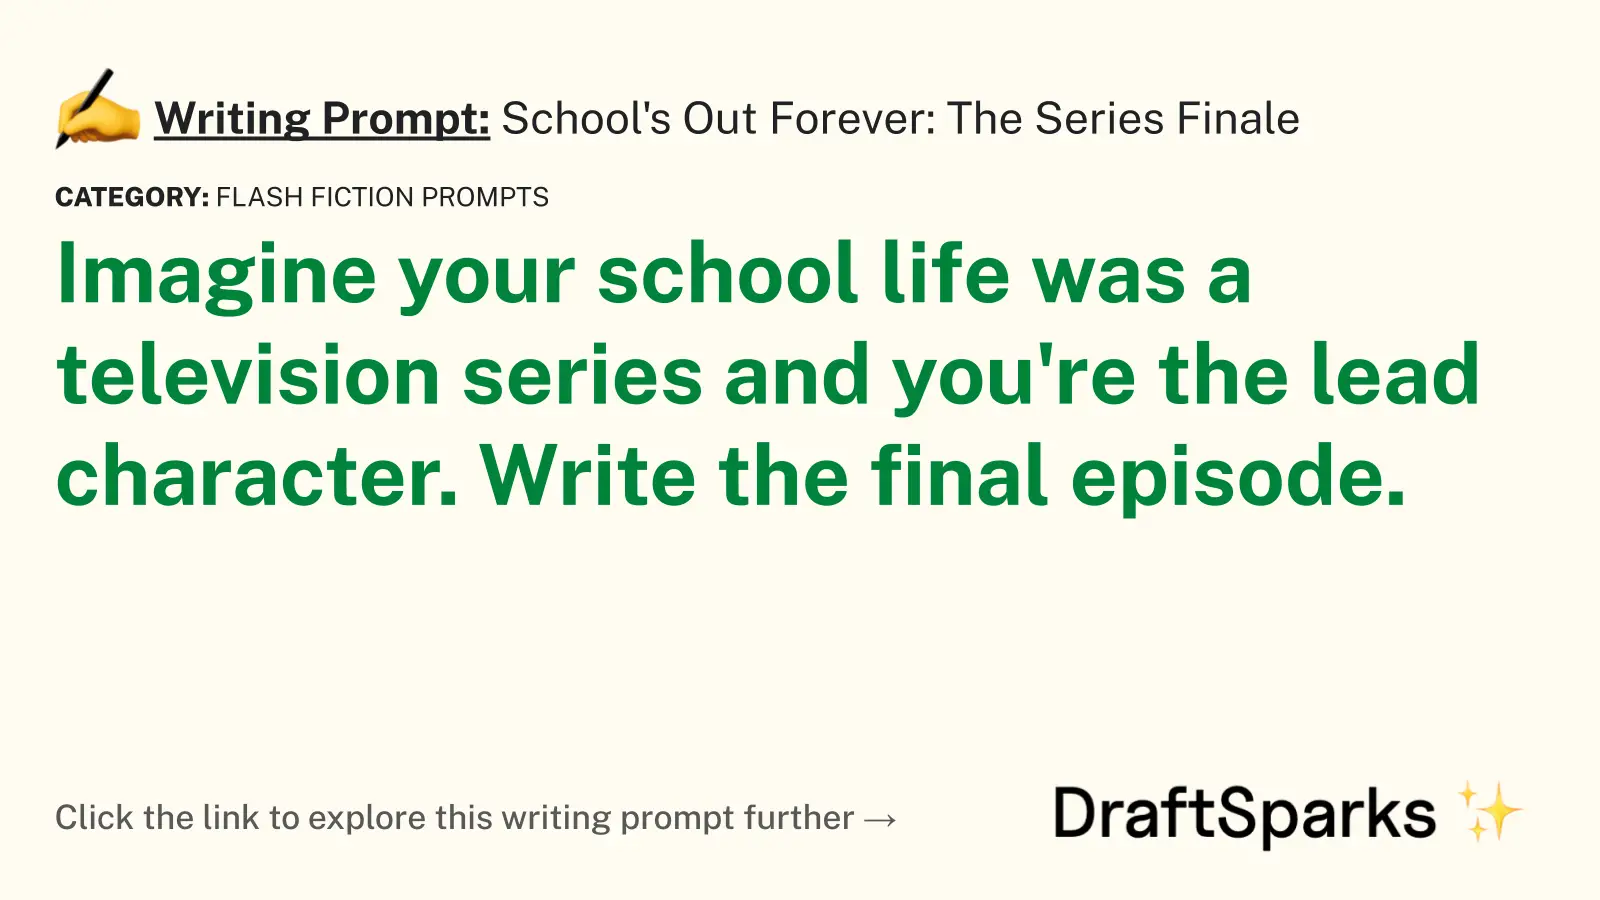 School’s Out Forever: The Series Finale